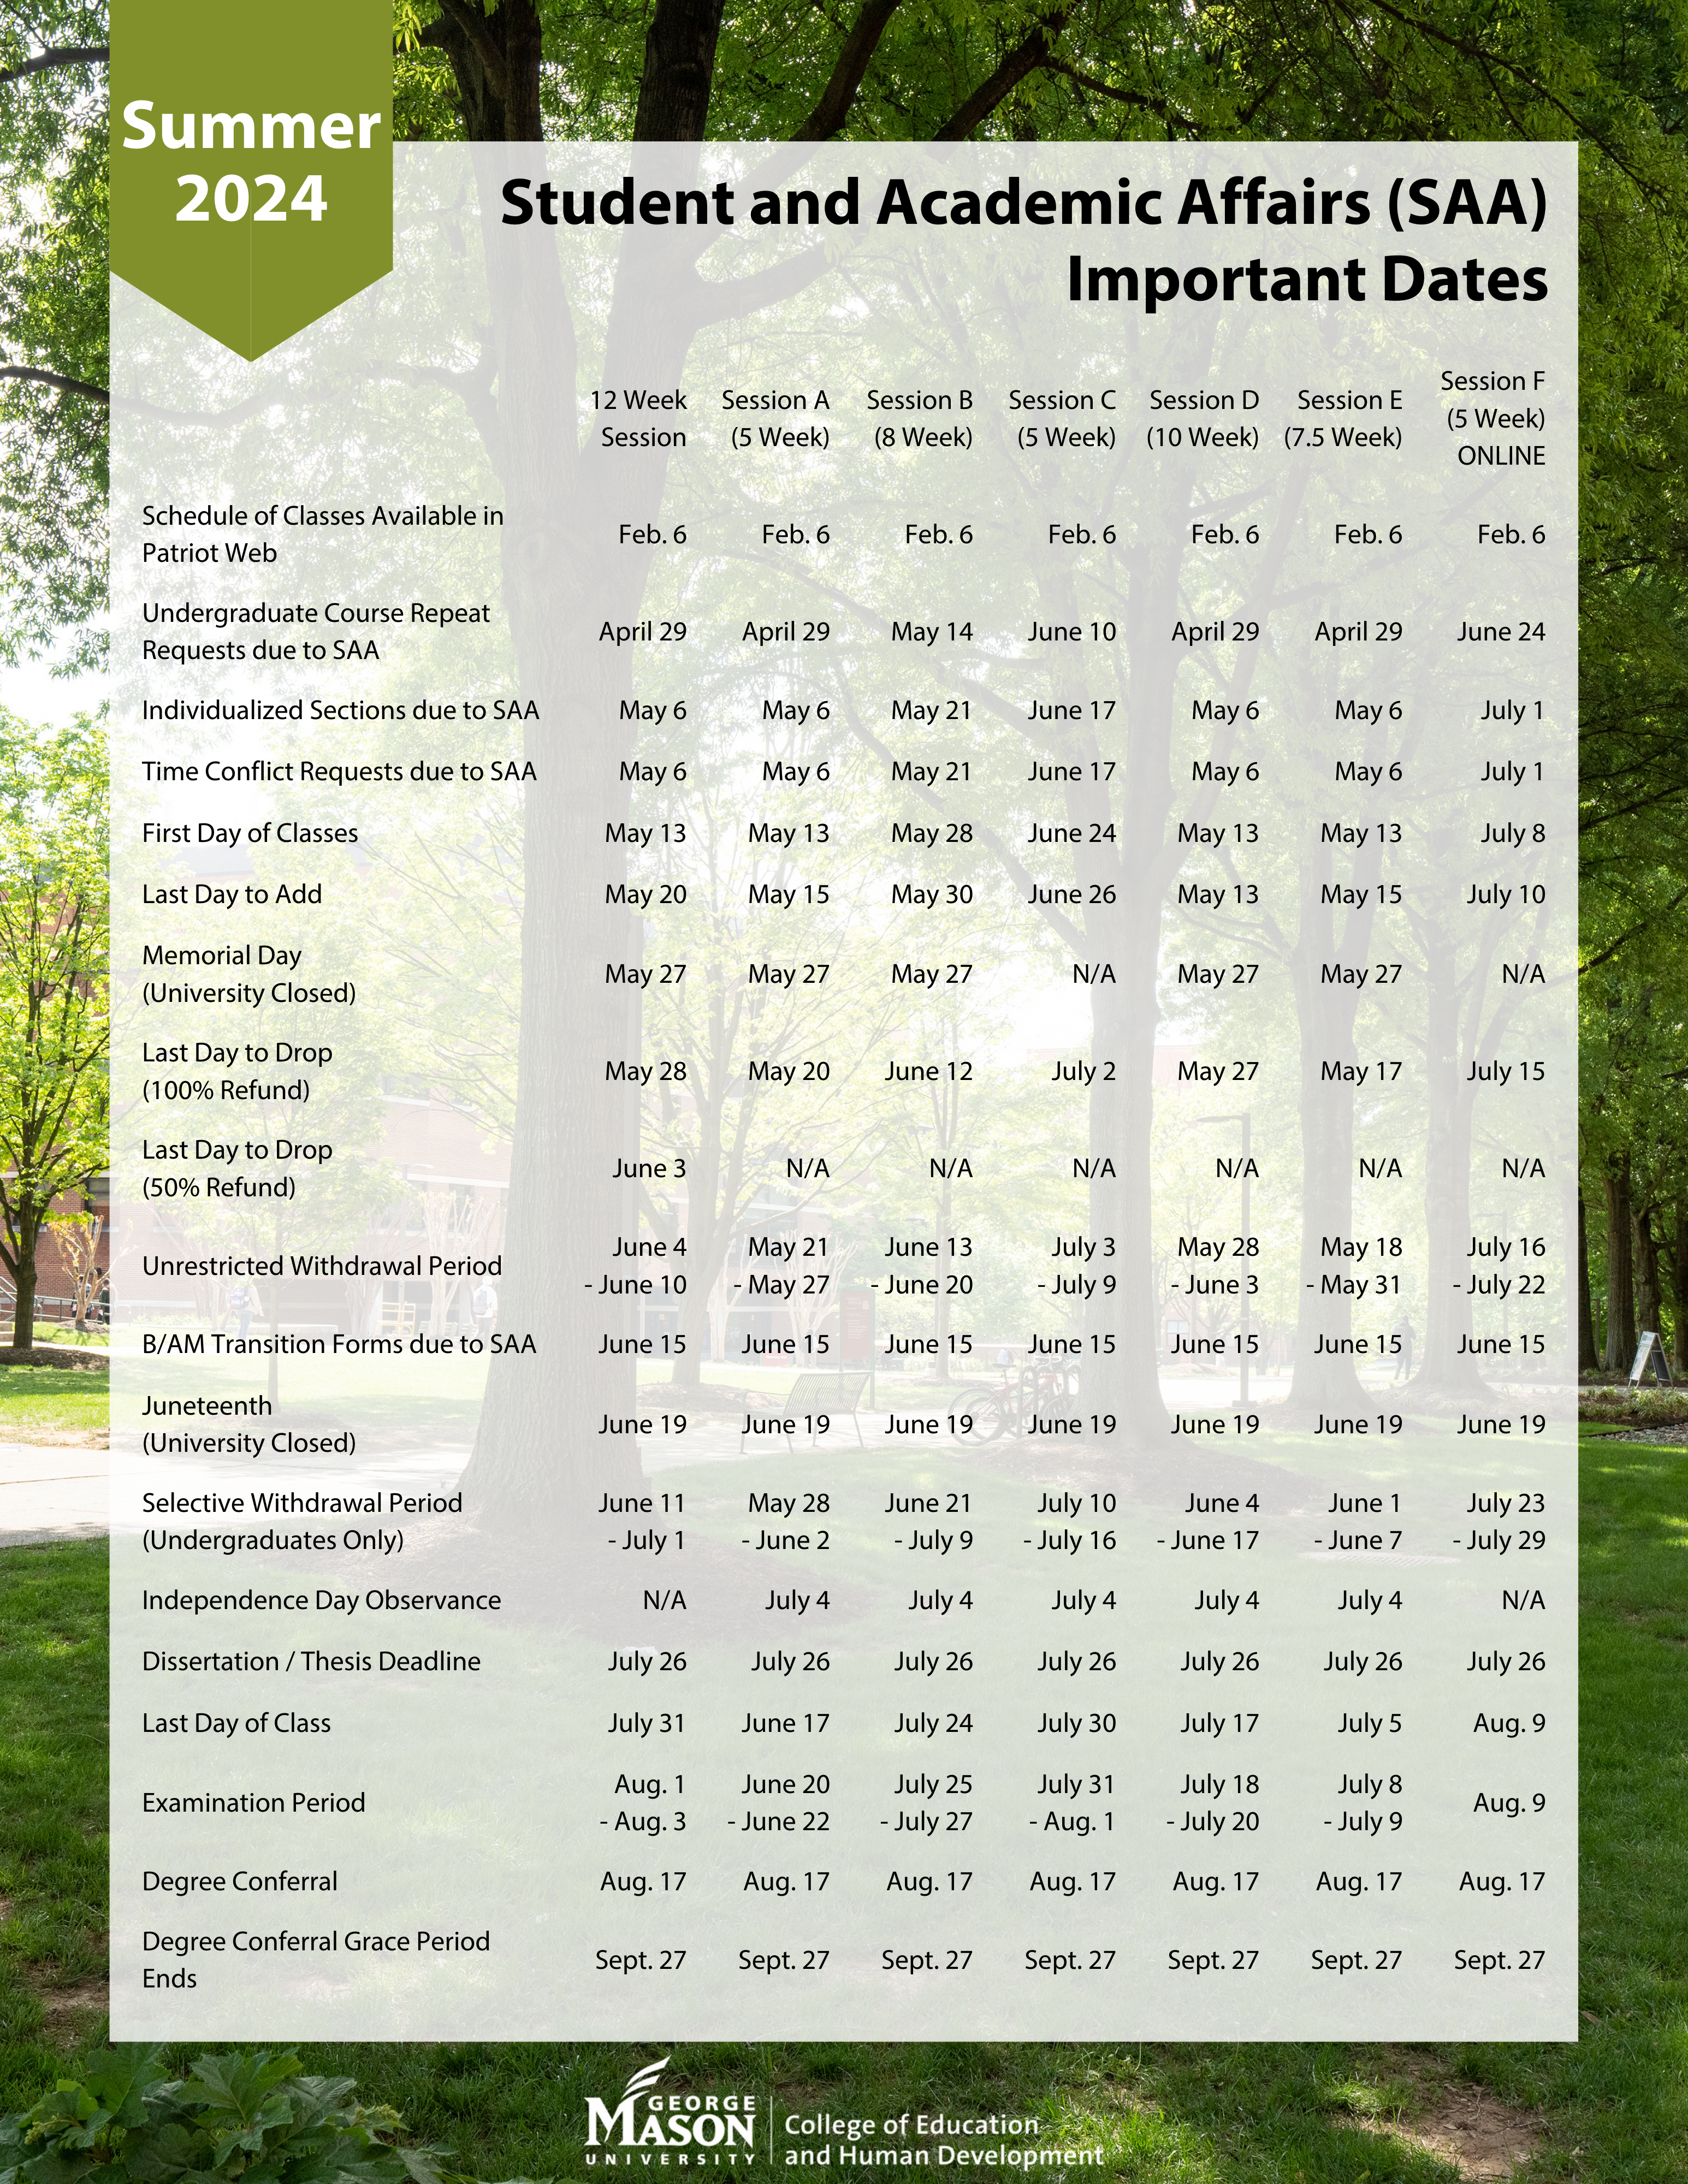 Summer 2024 Important Dates and Deadlines List